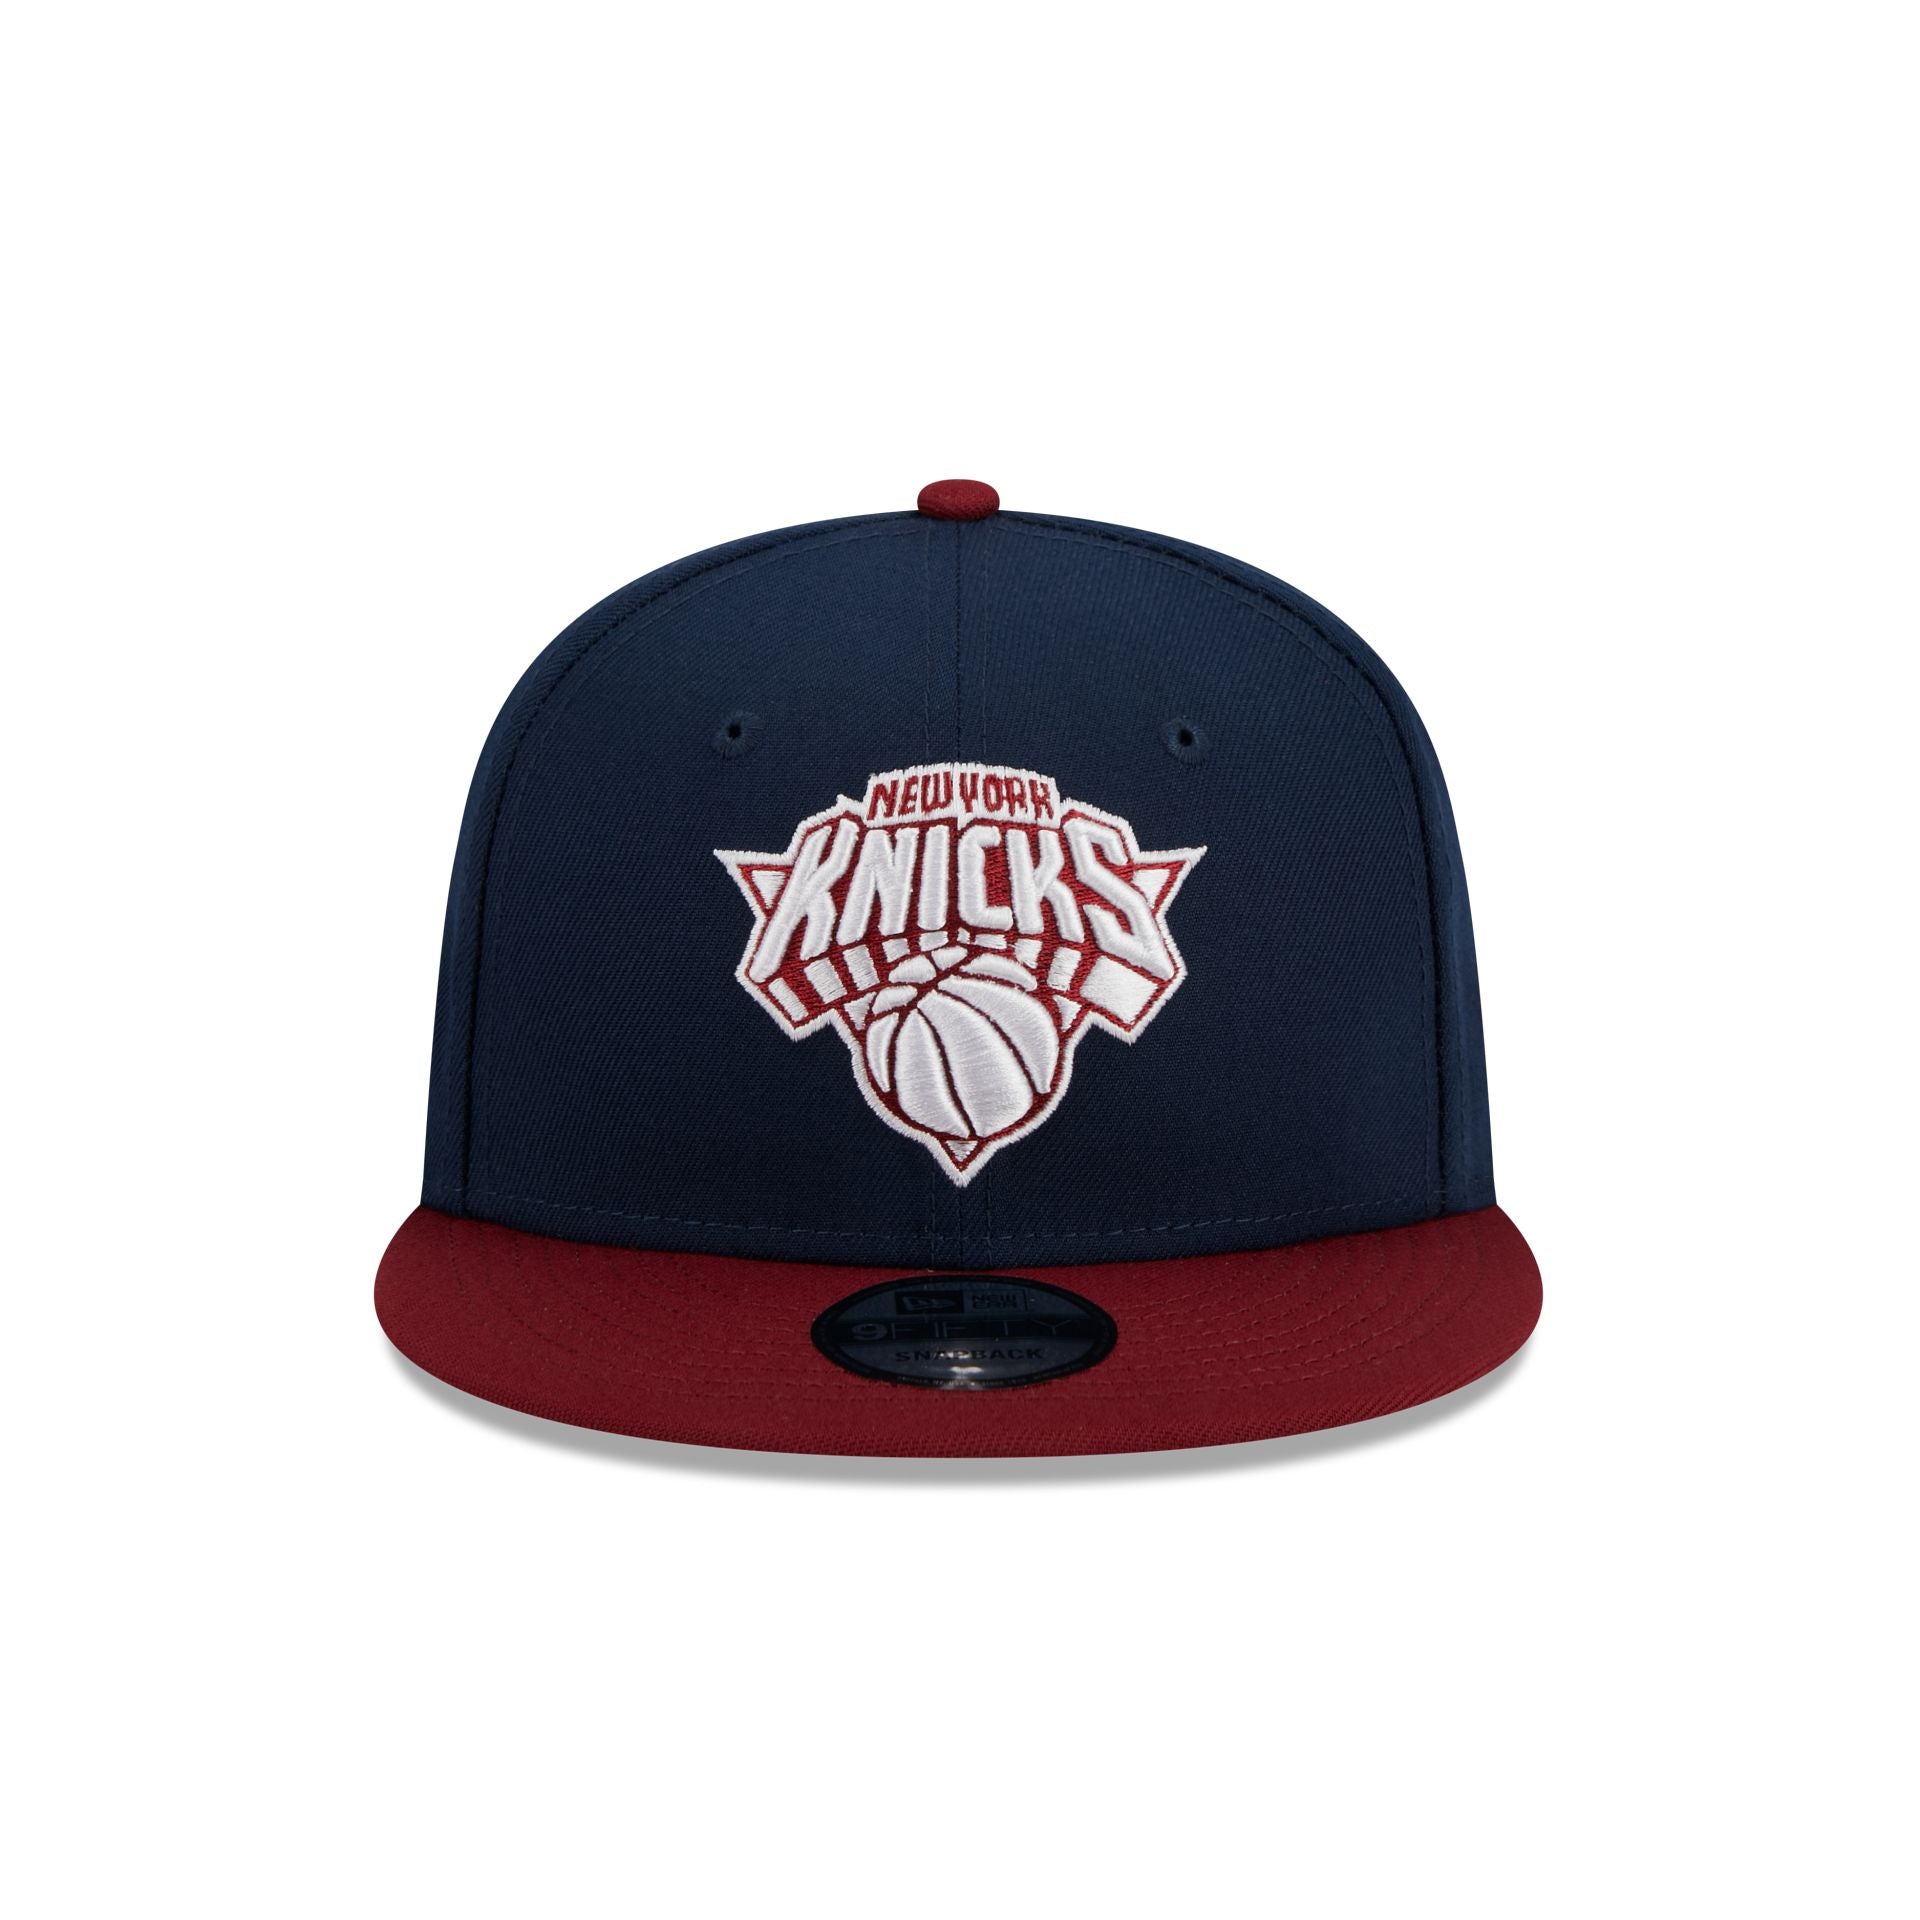  NBA New York Knicks White Front Basic 5950 Fitted Cap